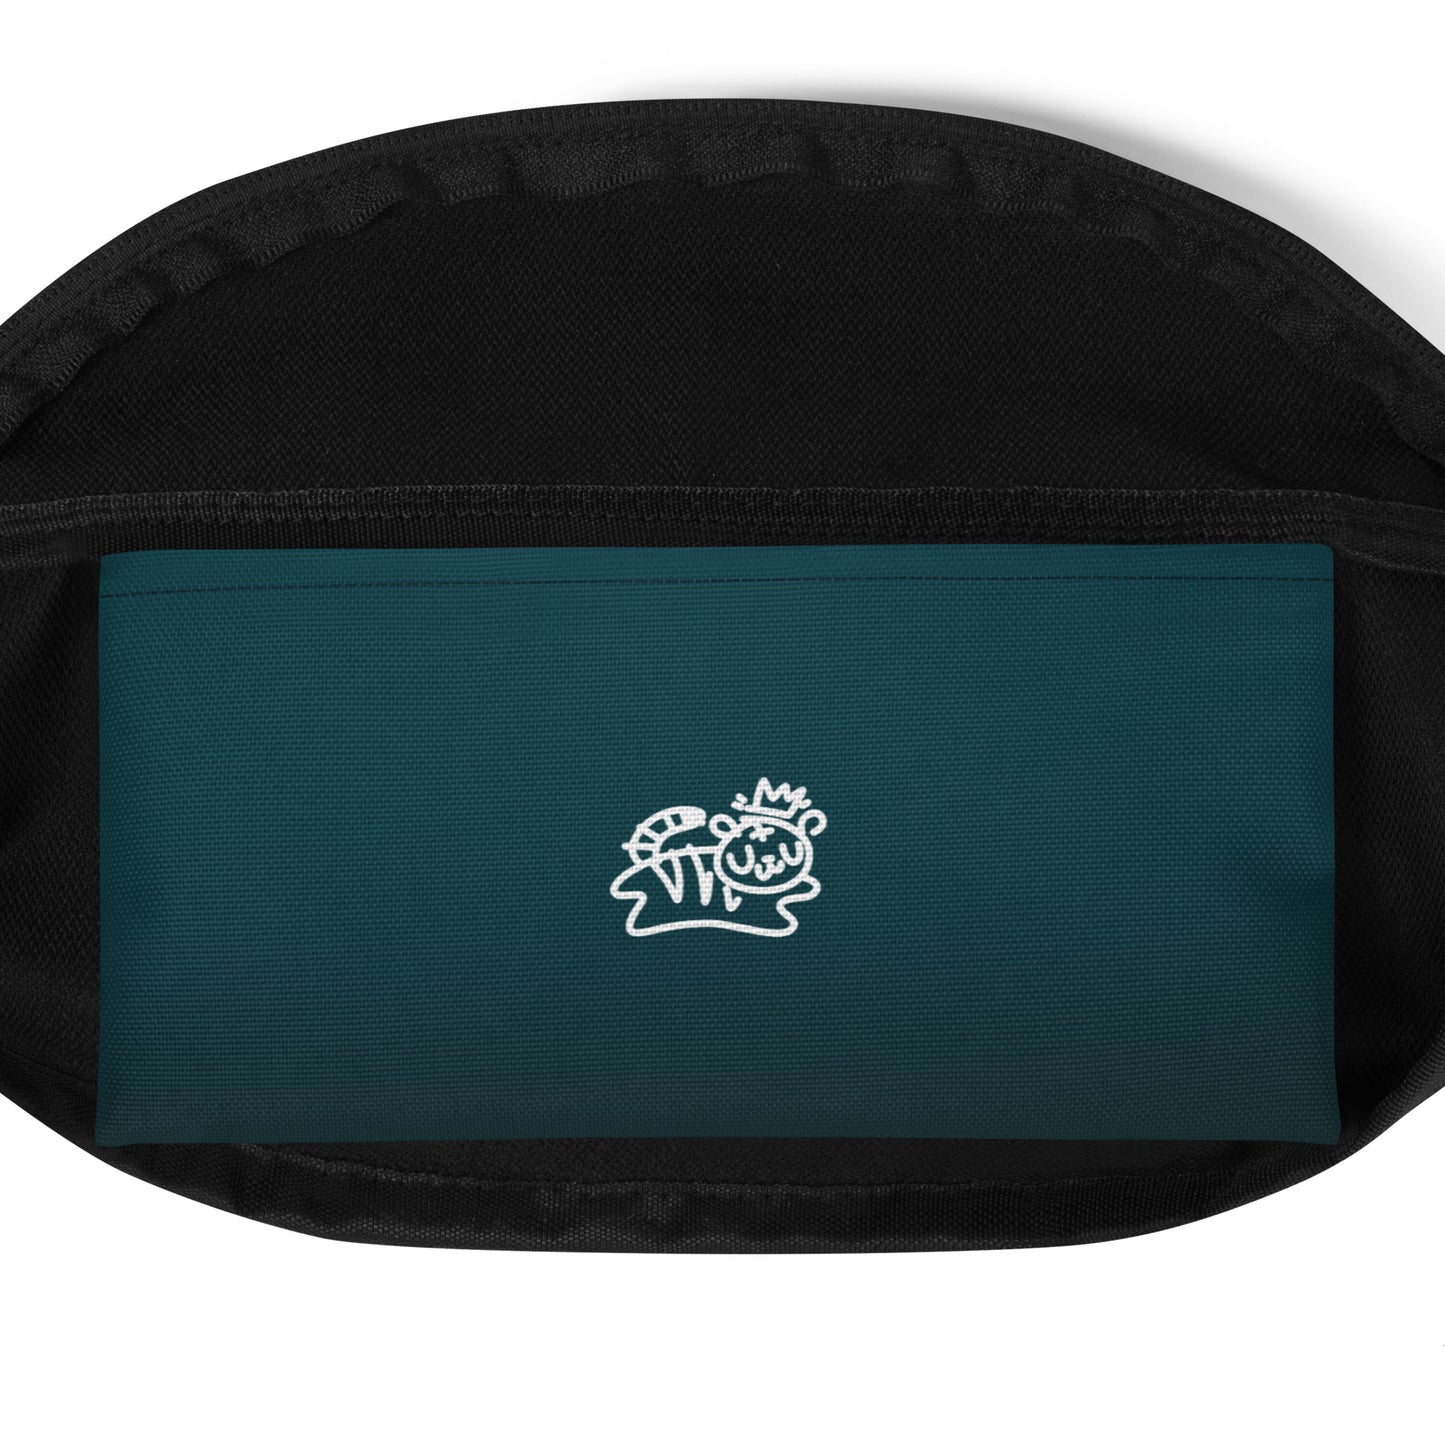 inside poke of fanny pack featuring dark blue ombre pattern and tiger bolt-wear logo